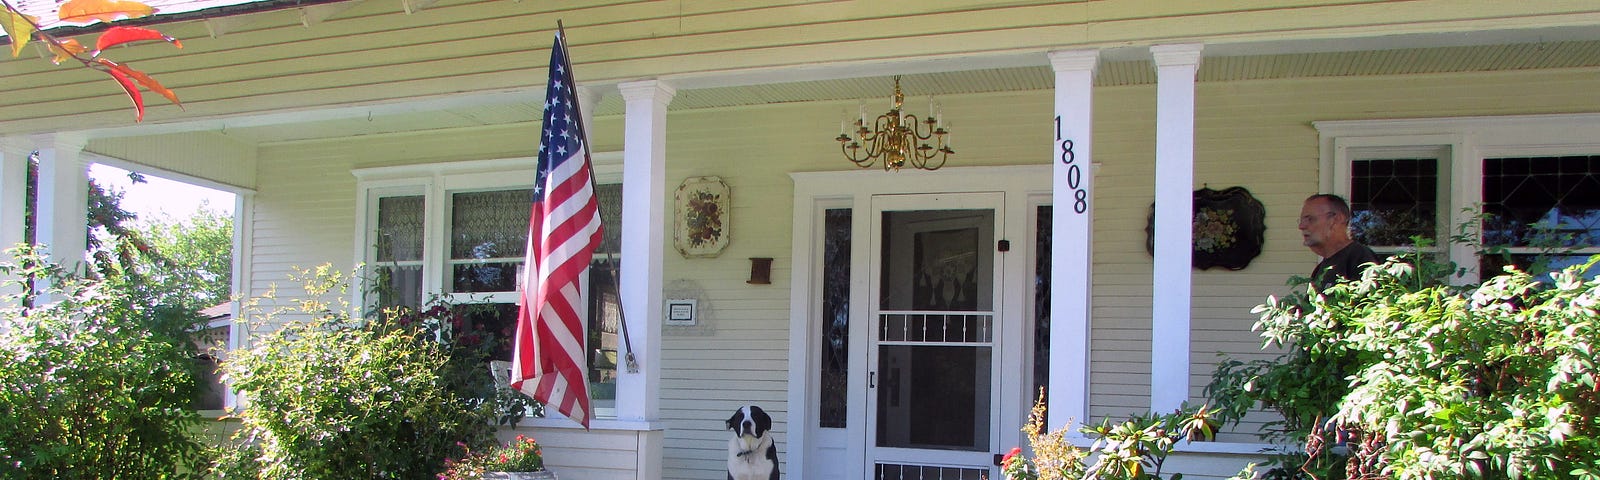 Old house with flag flying, dog on porch